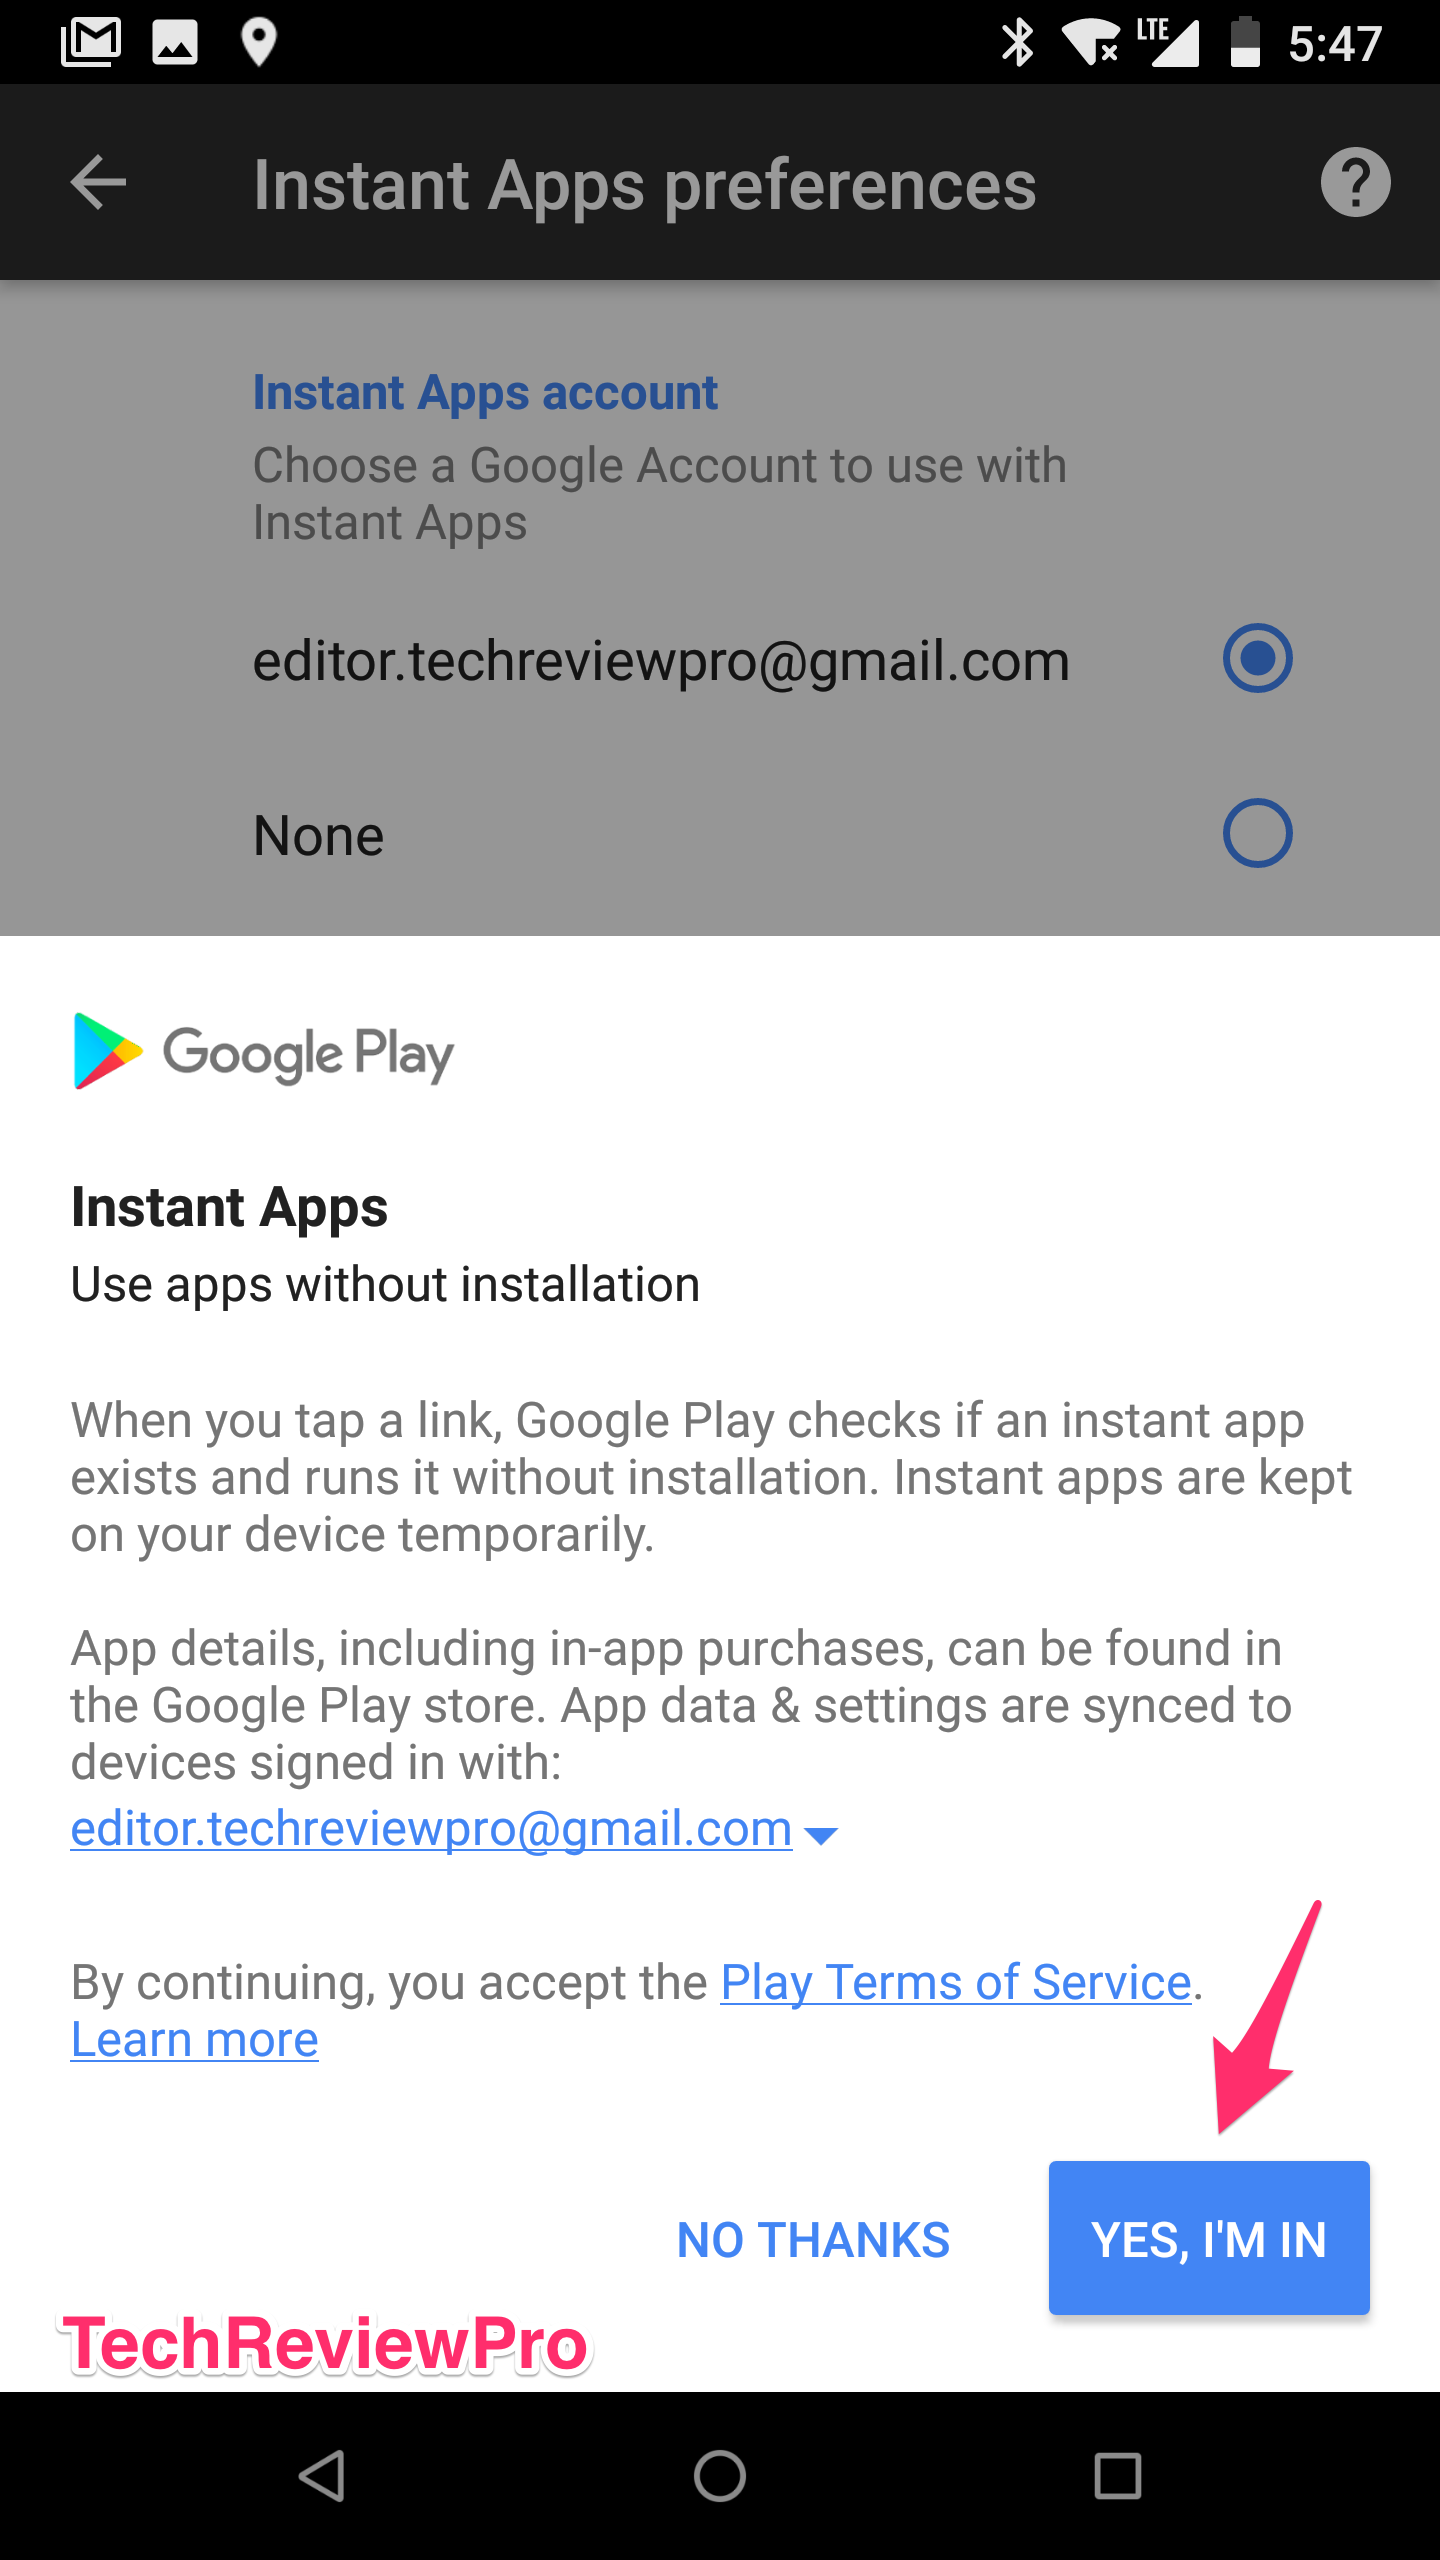 Google Instant Apps - Play Free Games without Downloading on Android